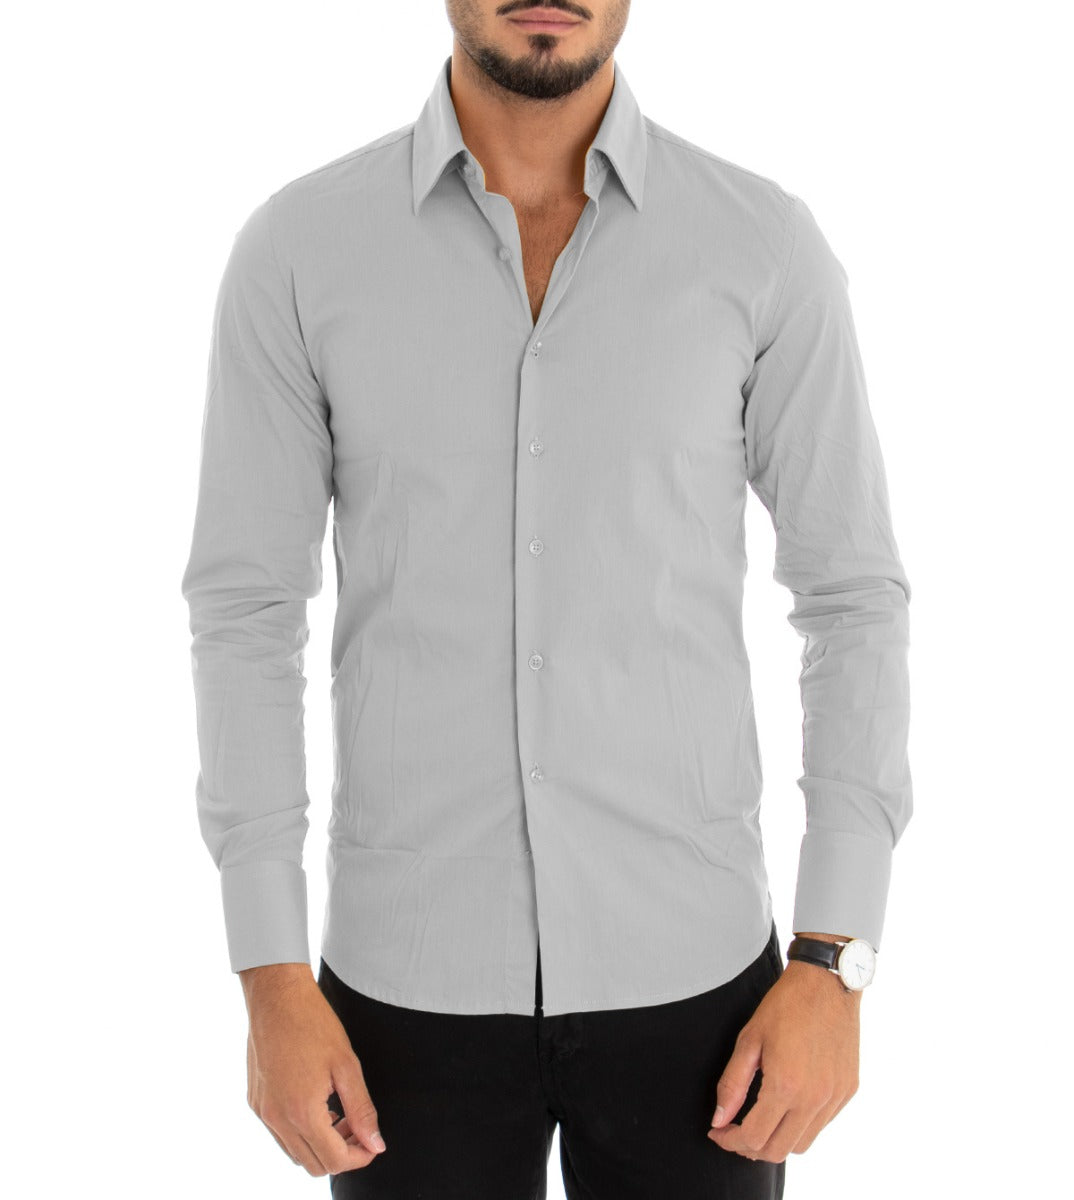 Men's Shirt With Collar Long Sleeve Slim Fit Basic Casual Cotton Gray GIOSAL-C1813A